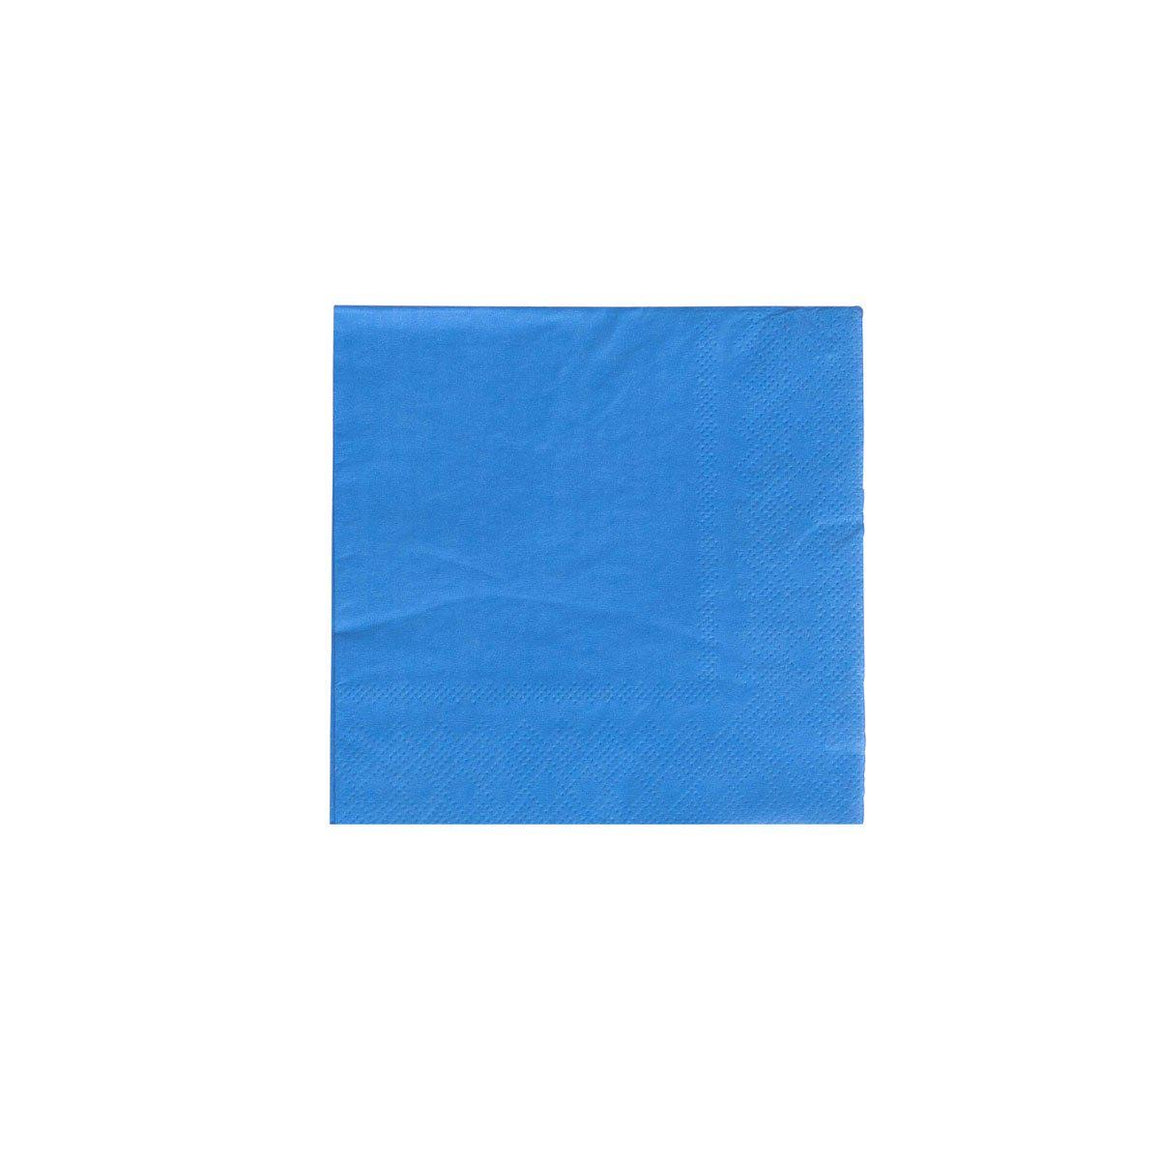 NAPKINS SMALL - BLUE POOL OH HAPPY DAY